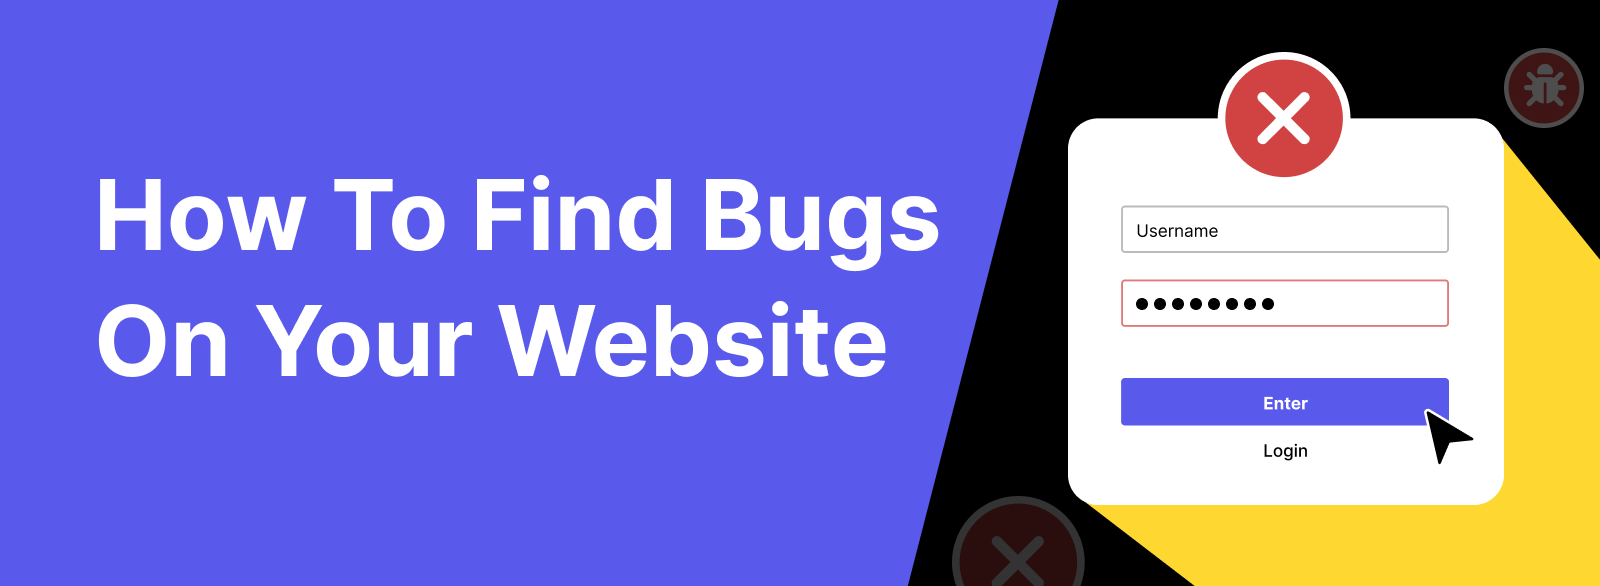 How to find bugs on your website